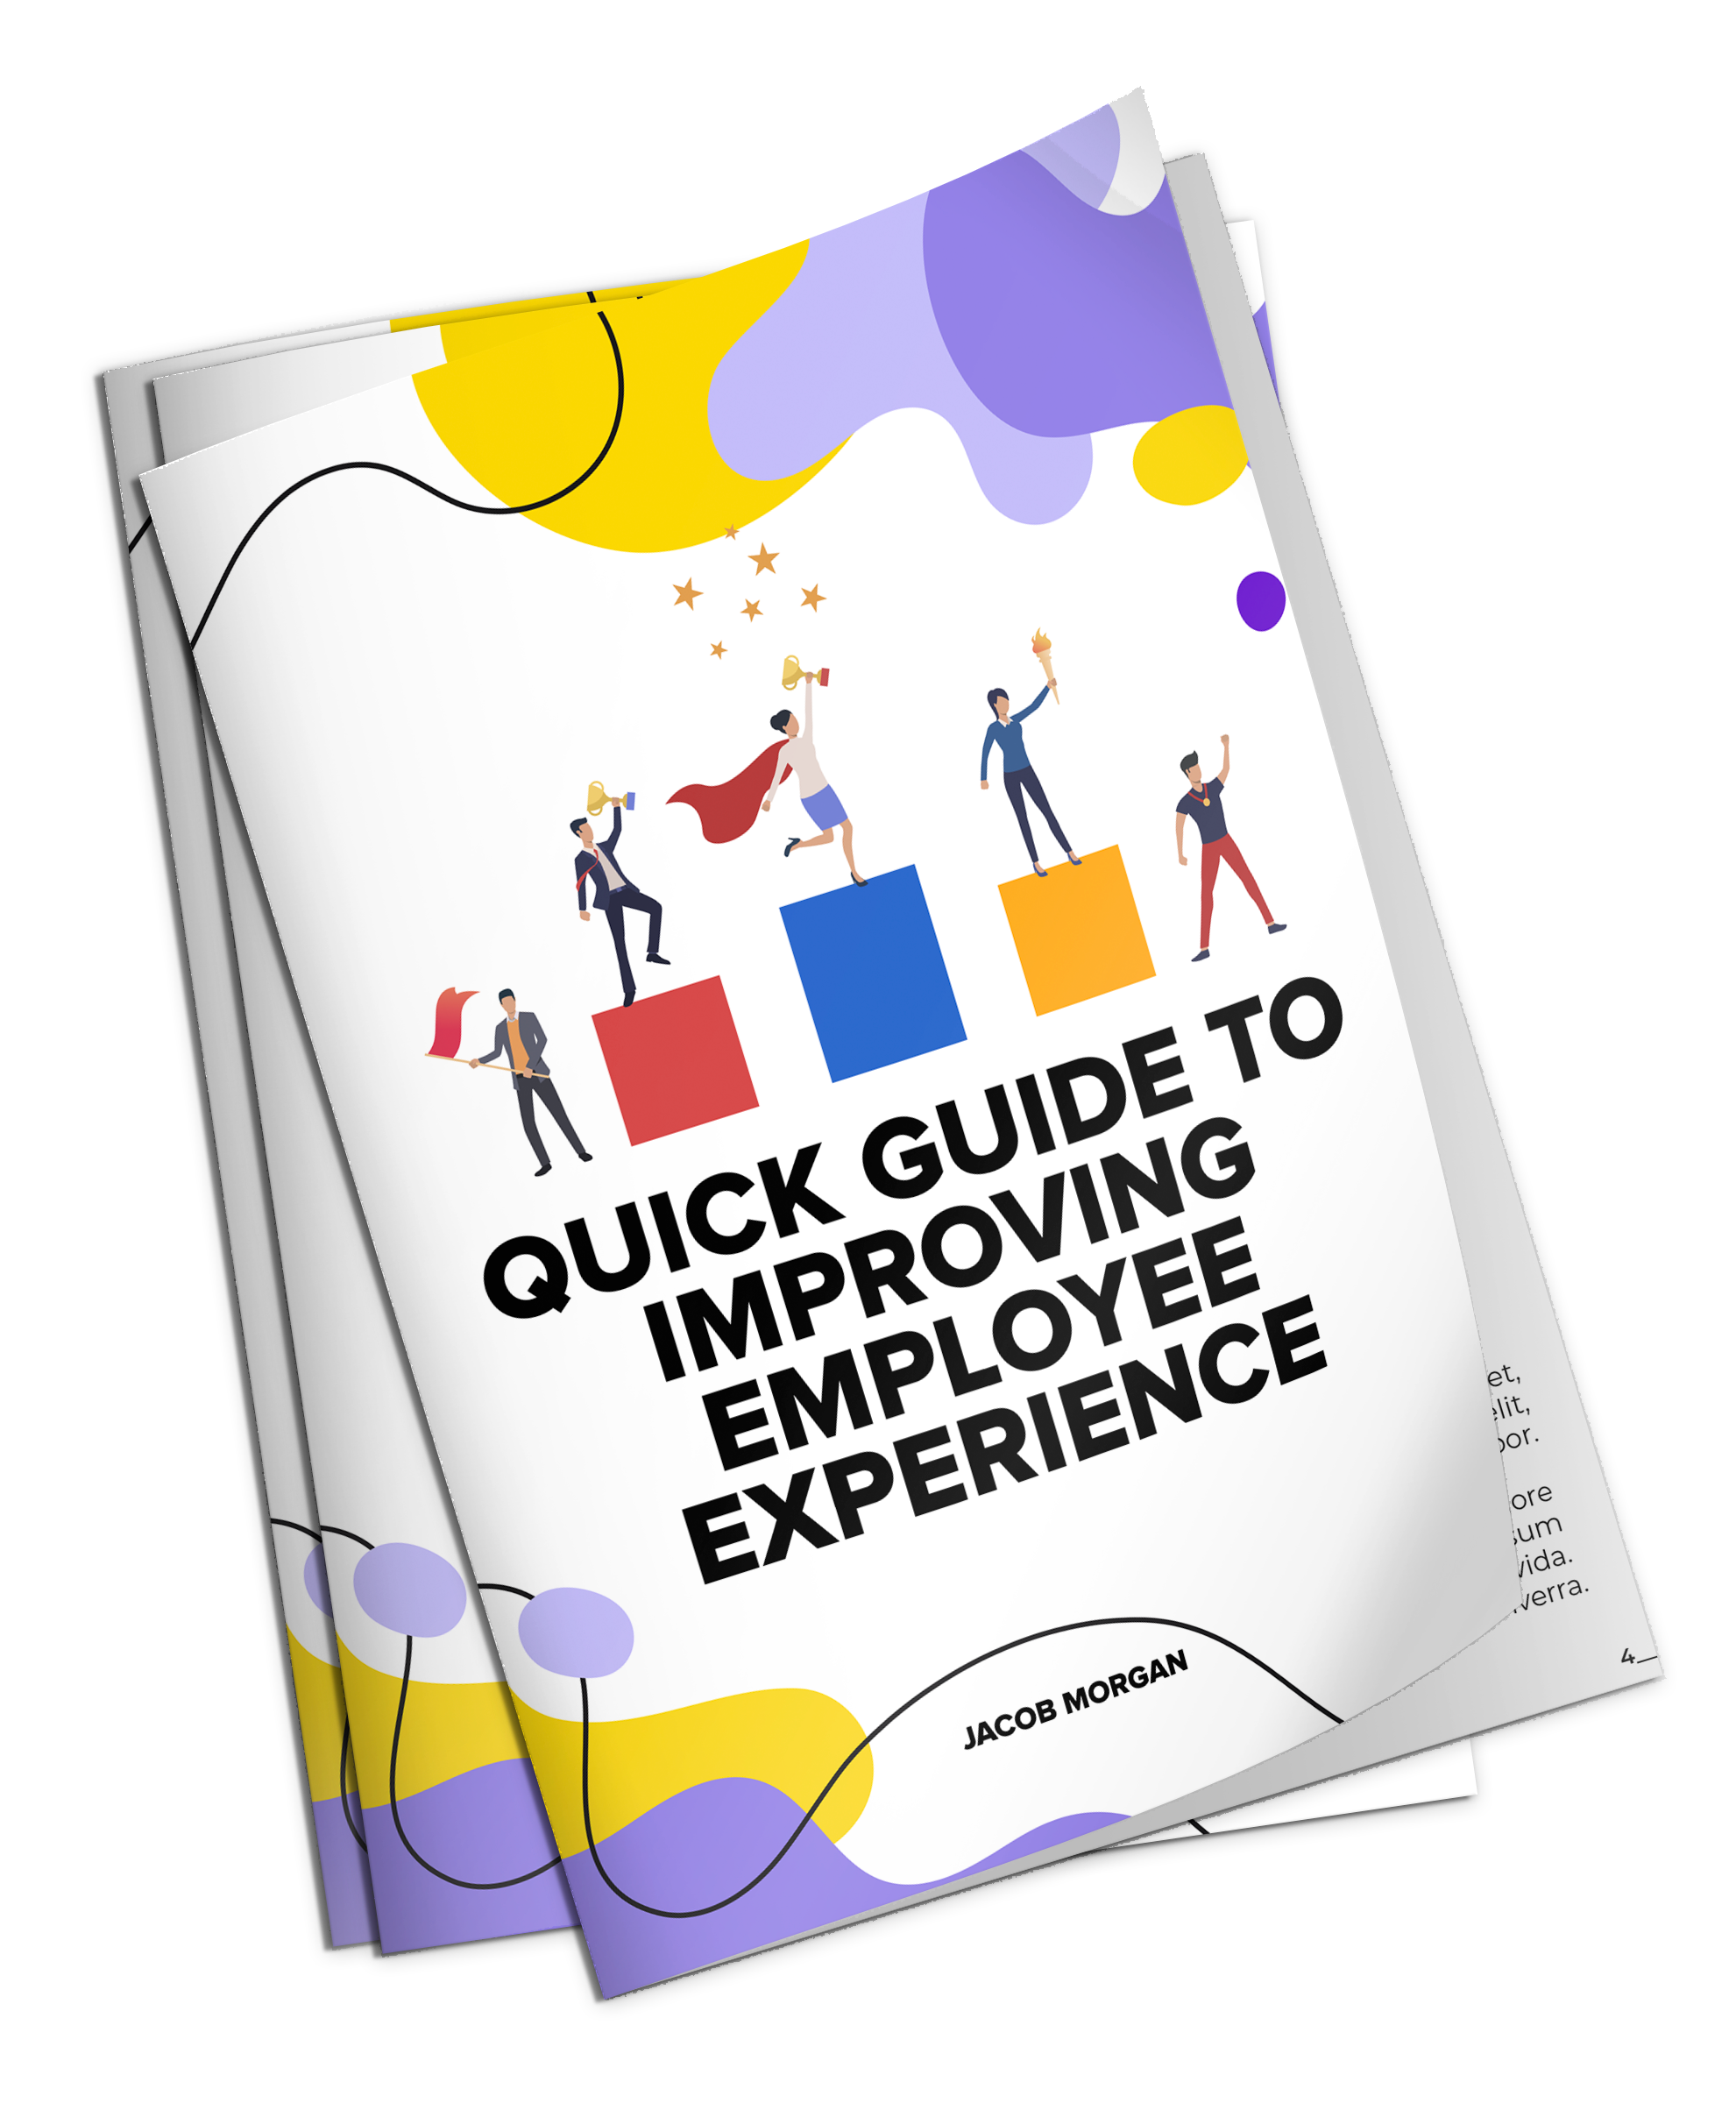 Quick Guide to Improving Employee Experience